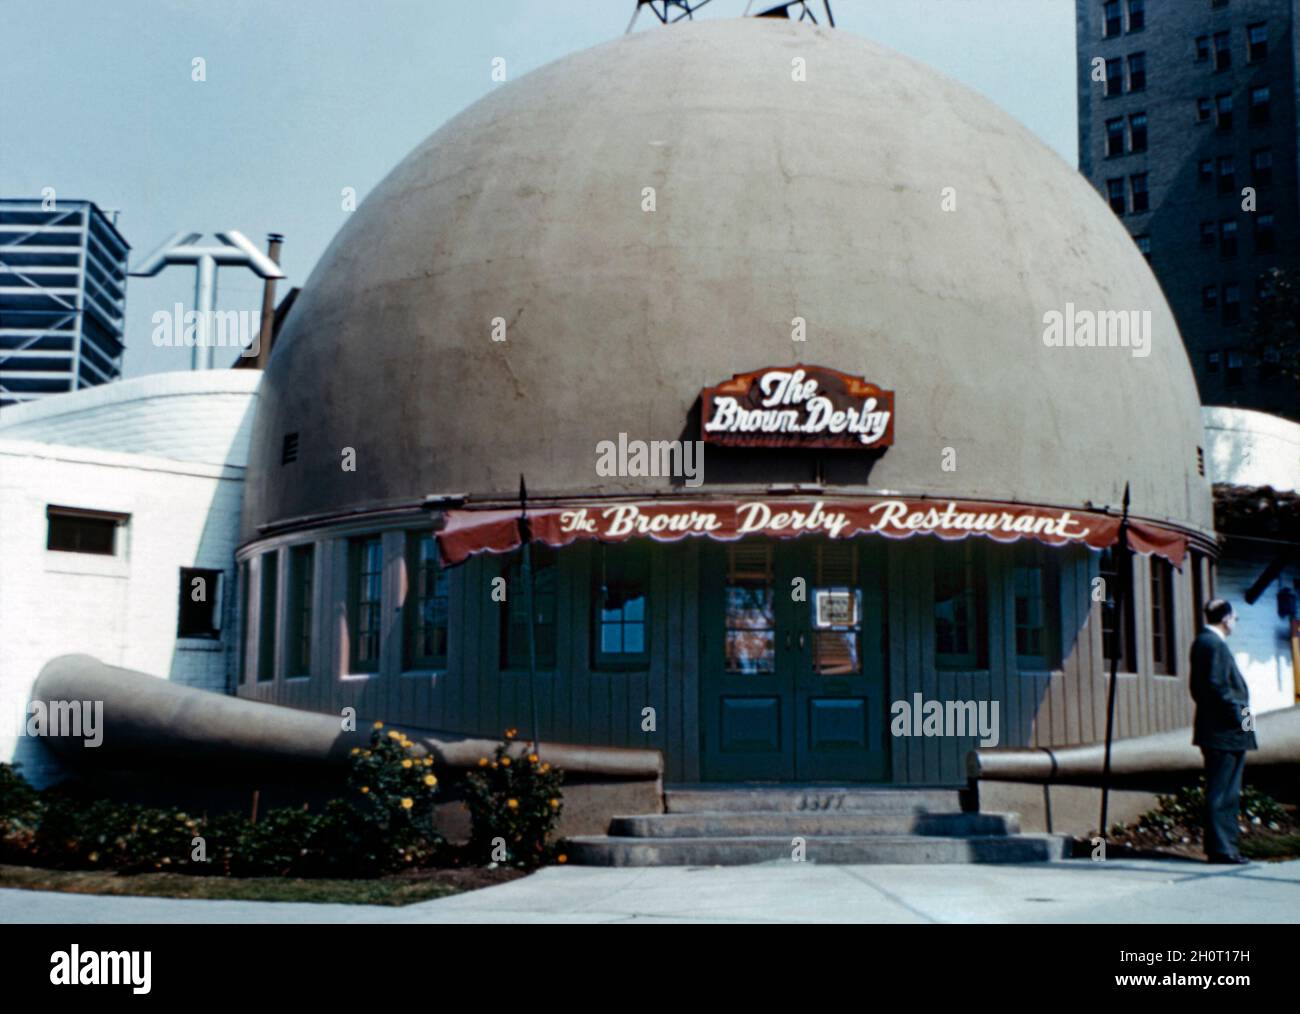 The original Brown Derby restaurant at 3427 Wilshire Boulevard, Los Angeles, California, USA in the 1950s. The first and best known of an eventual restaurant chain was shaped like a man's derby hat, an iconic image that became synonymous with the Golden Age of Hollywood. It was opened by Wilson Mizner in 1926. The restaurants closed in the 1980s but a Disney-backed Brown Derby national franchising programme revived the brand in the 21st century – a vintage 1950s photograph. Stock Photo